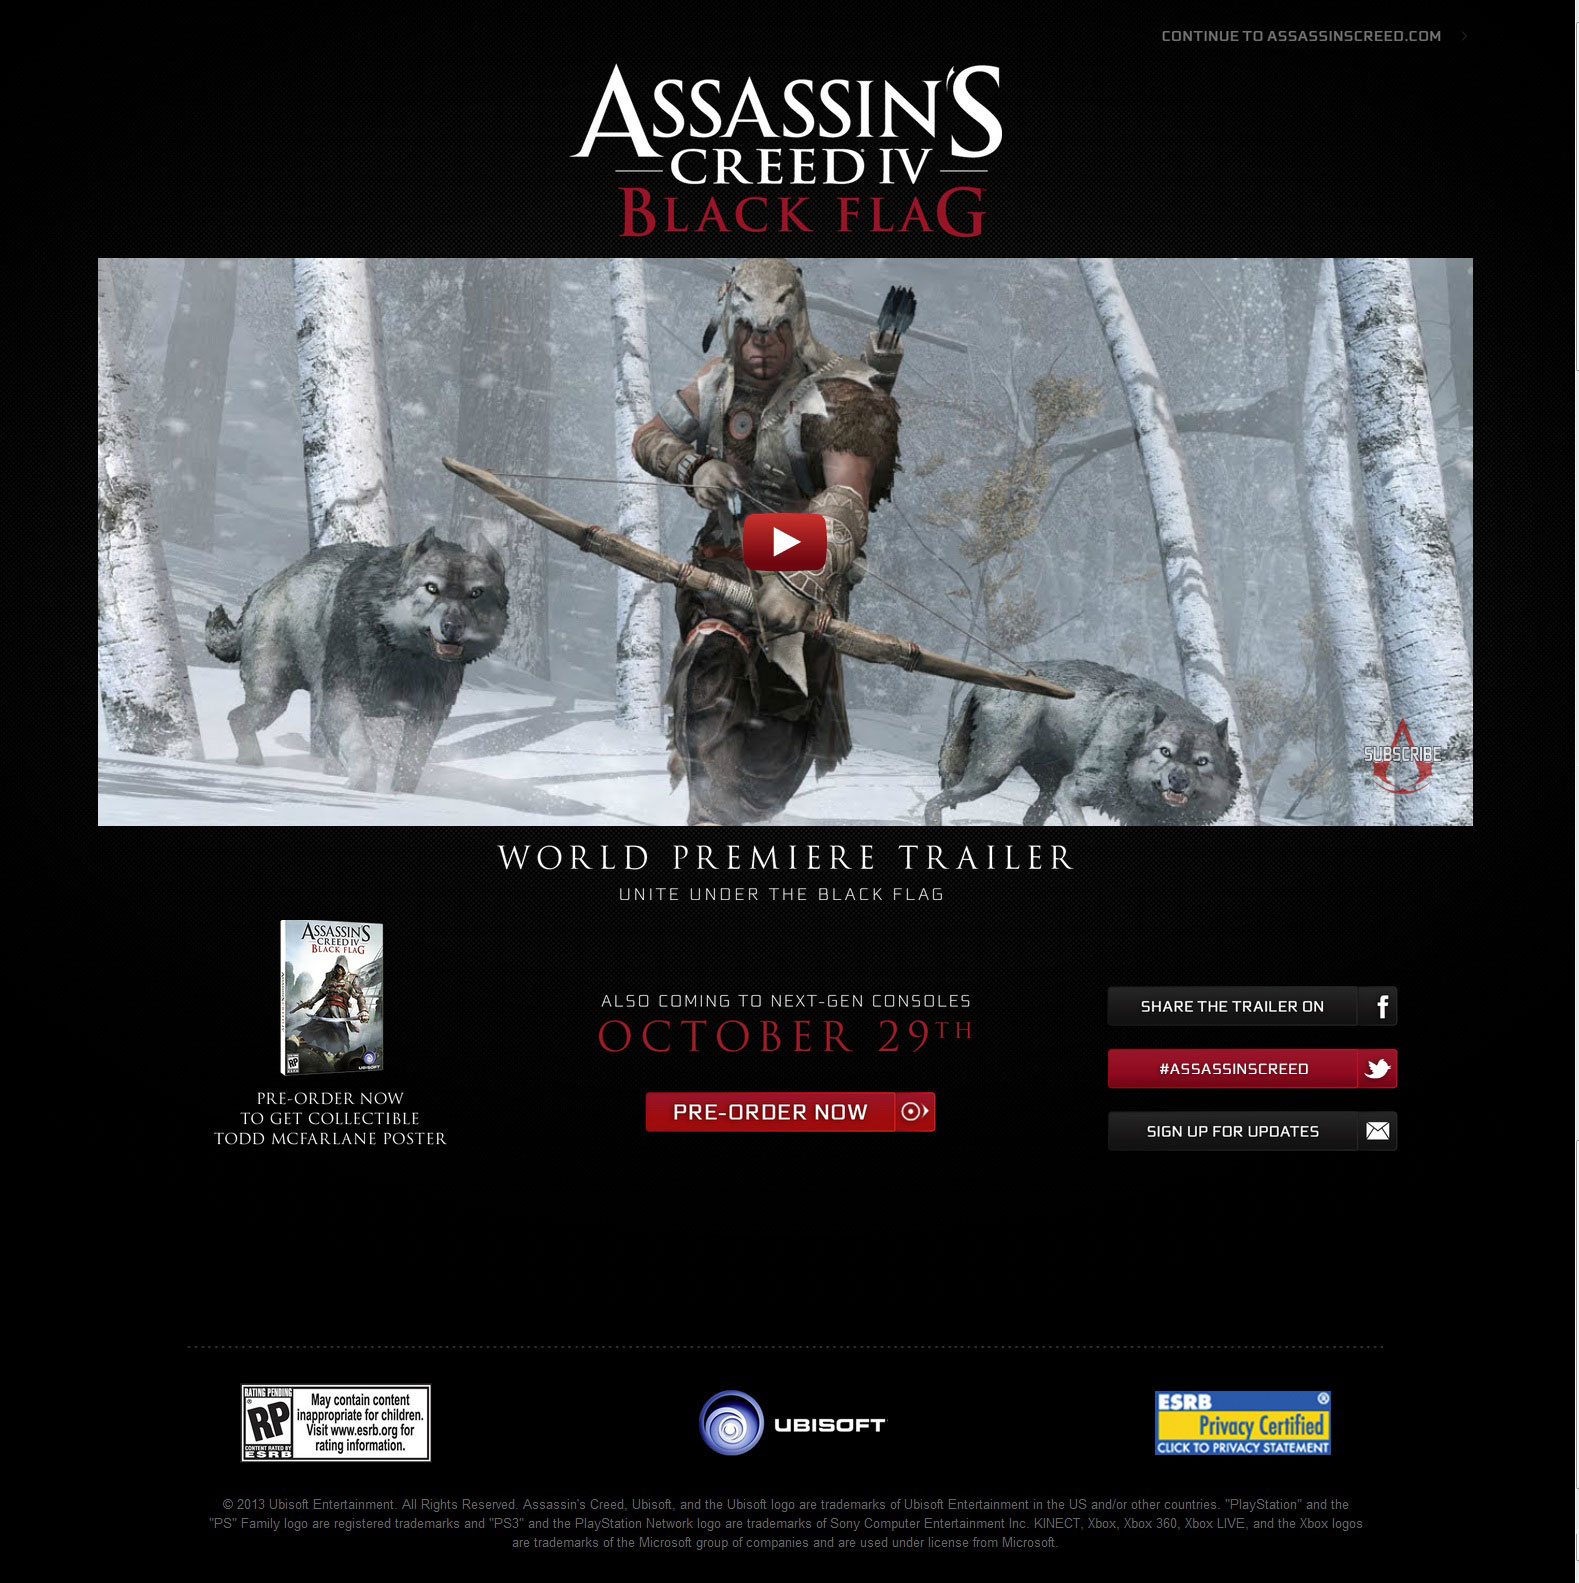 Assassins Creed IV Black Flag Release Date and Next-Gen Consoles Revealed pic 1